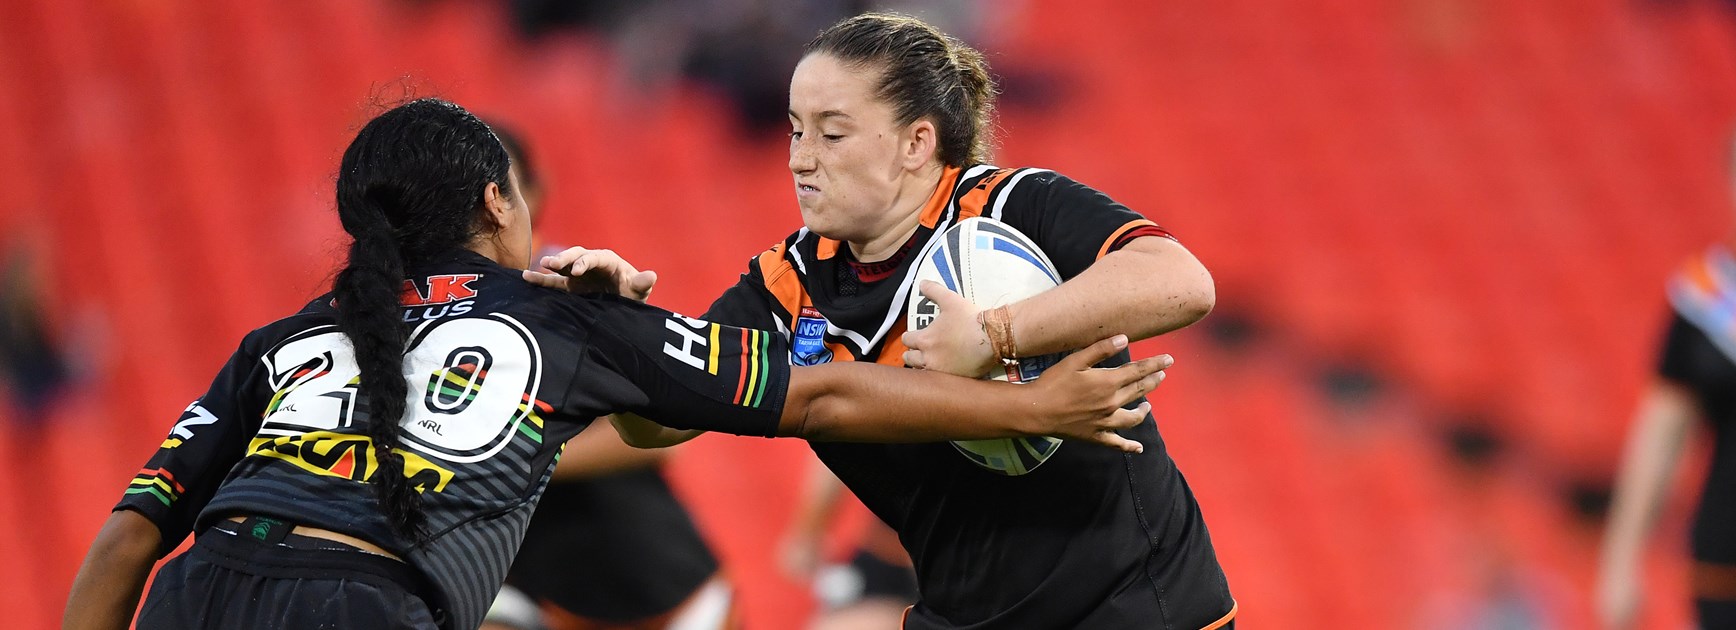 Join Wests Tigers Tarsha Gale side in 2020!